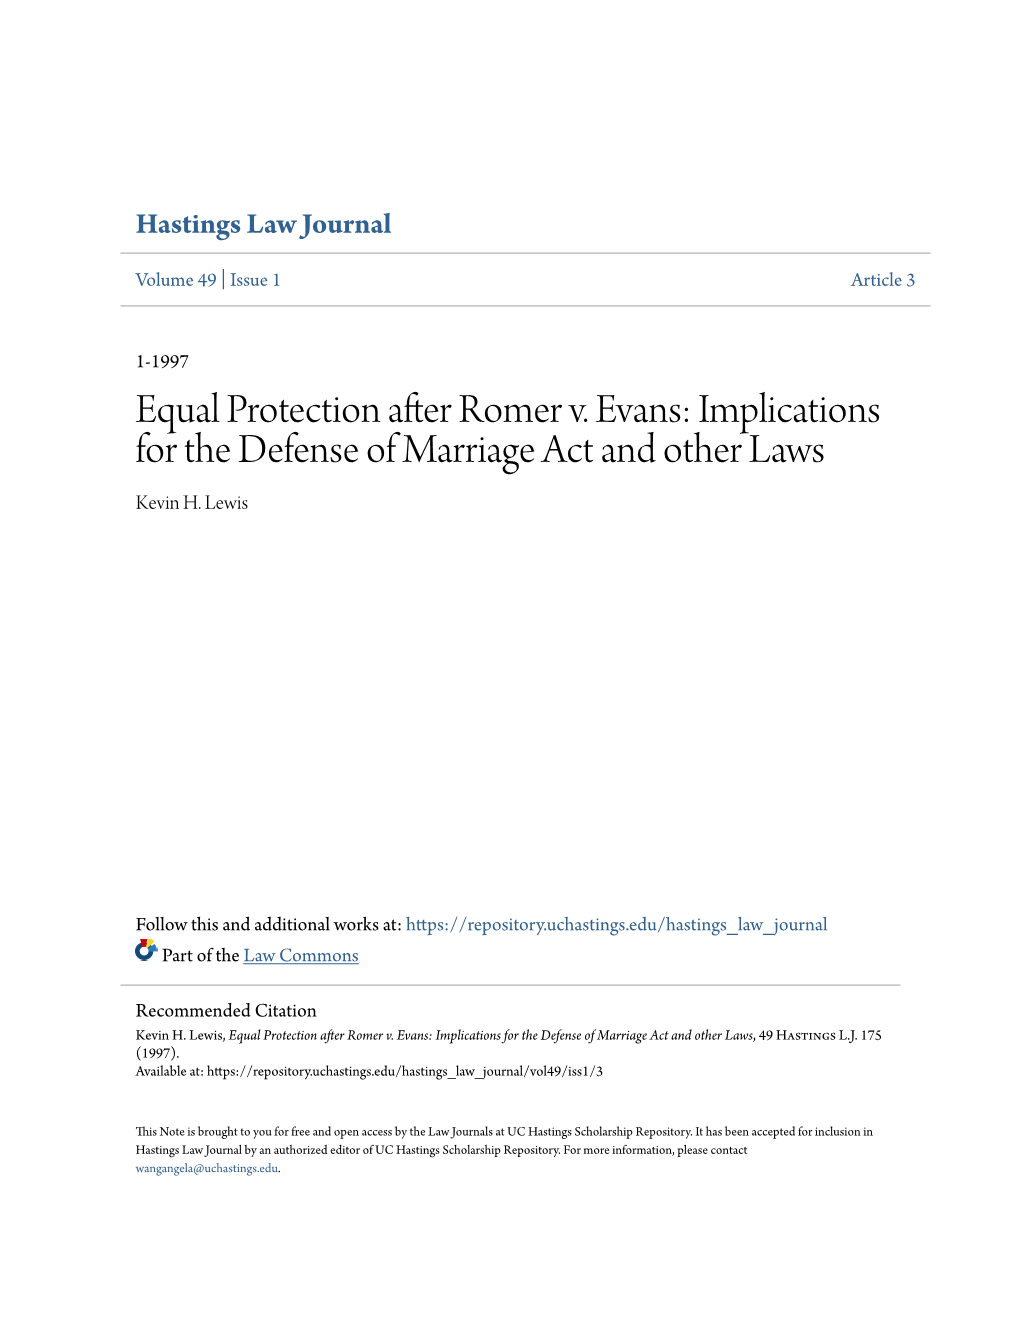 Equal Protection After Romer V. Evans: Implications for the Defense of Marriage Act and Other Laws Kevin H